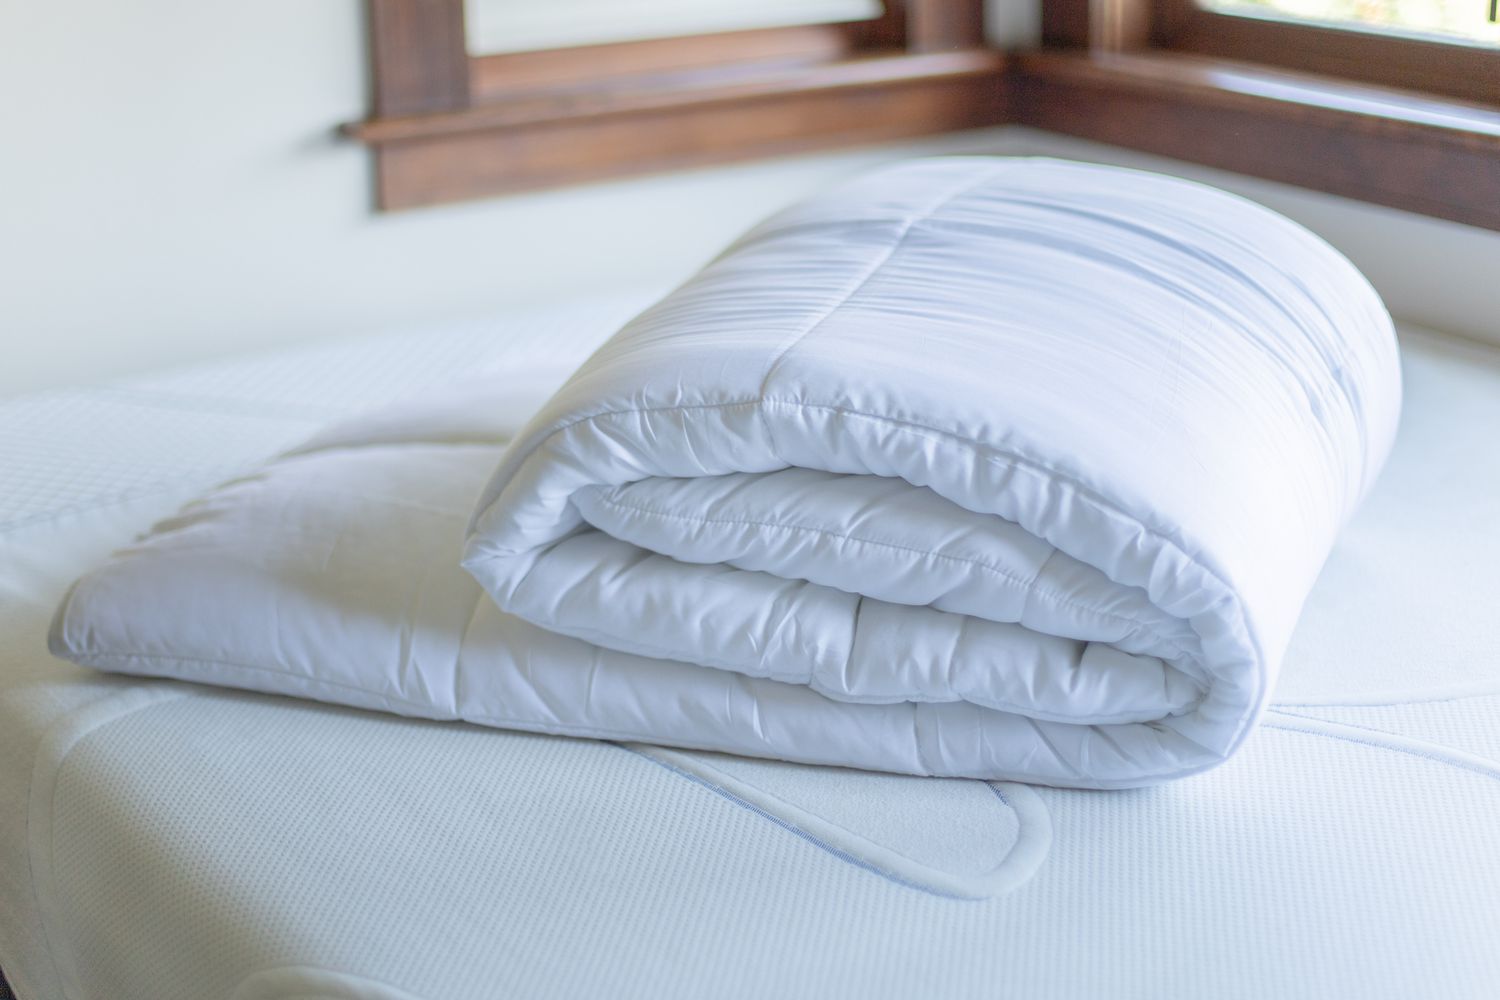 comforter folded on top of a mattress